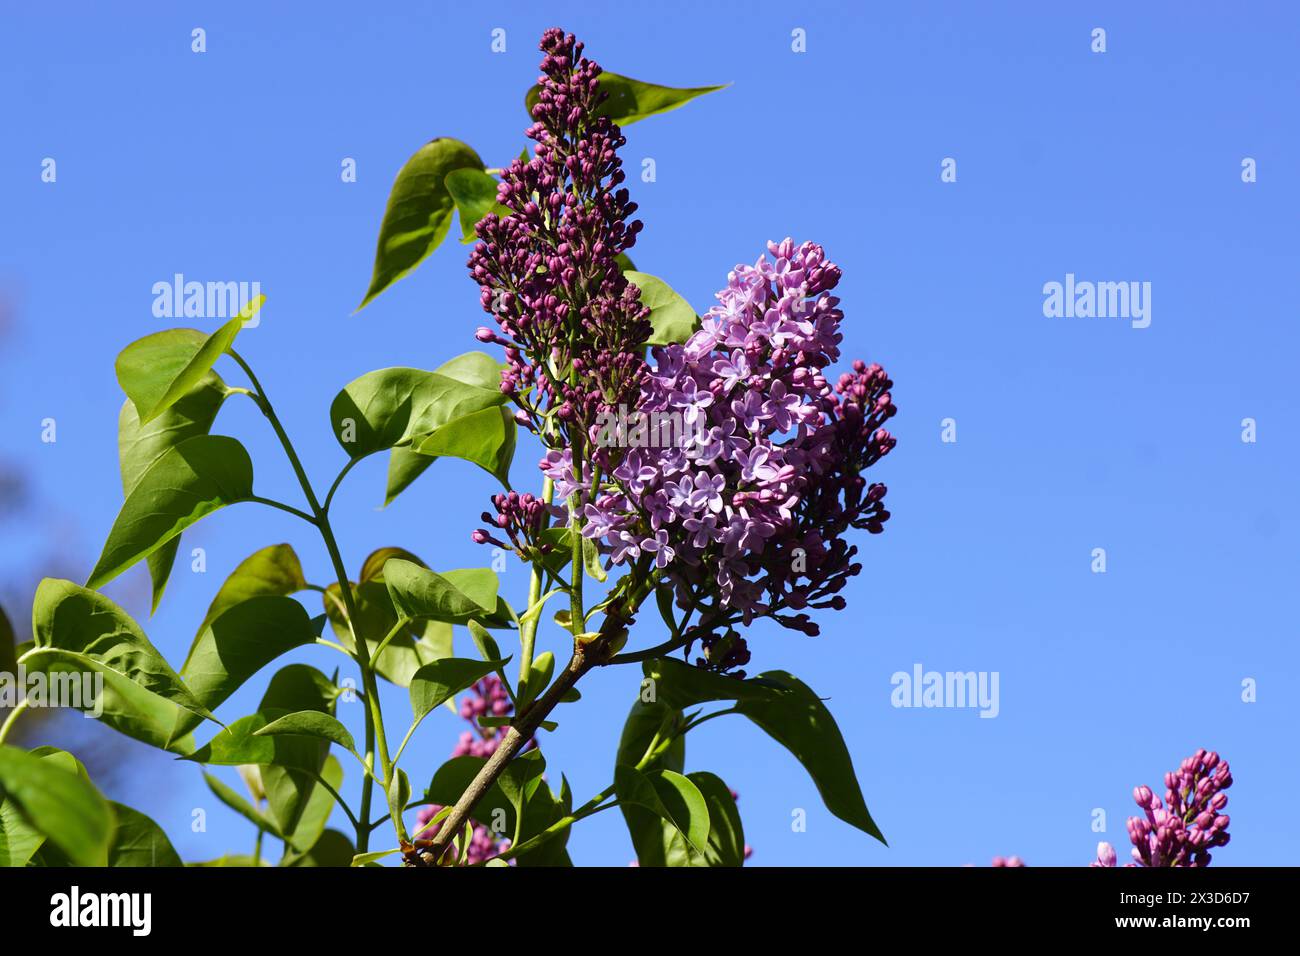 Flowers of lilac or common lilac (Syringa vulgaris), olive family (Oleaceae) in a Dutch garden in the spring. Blue sky. Stock Photo